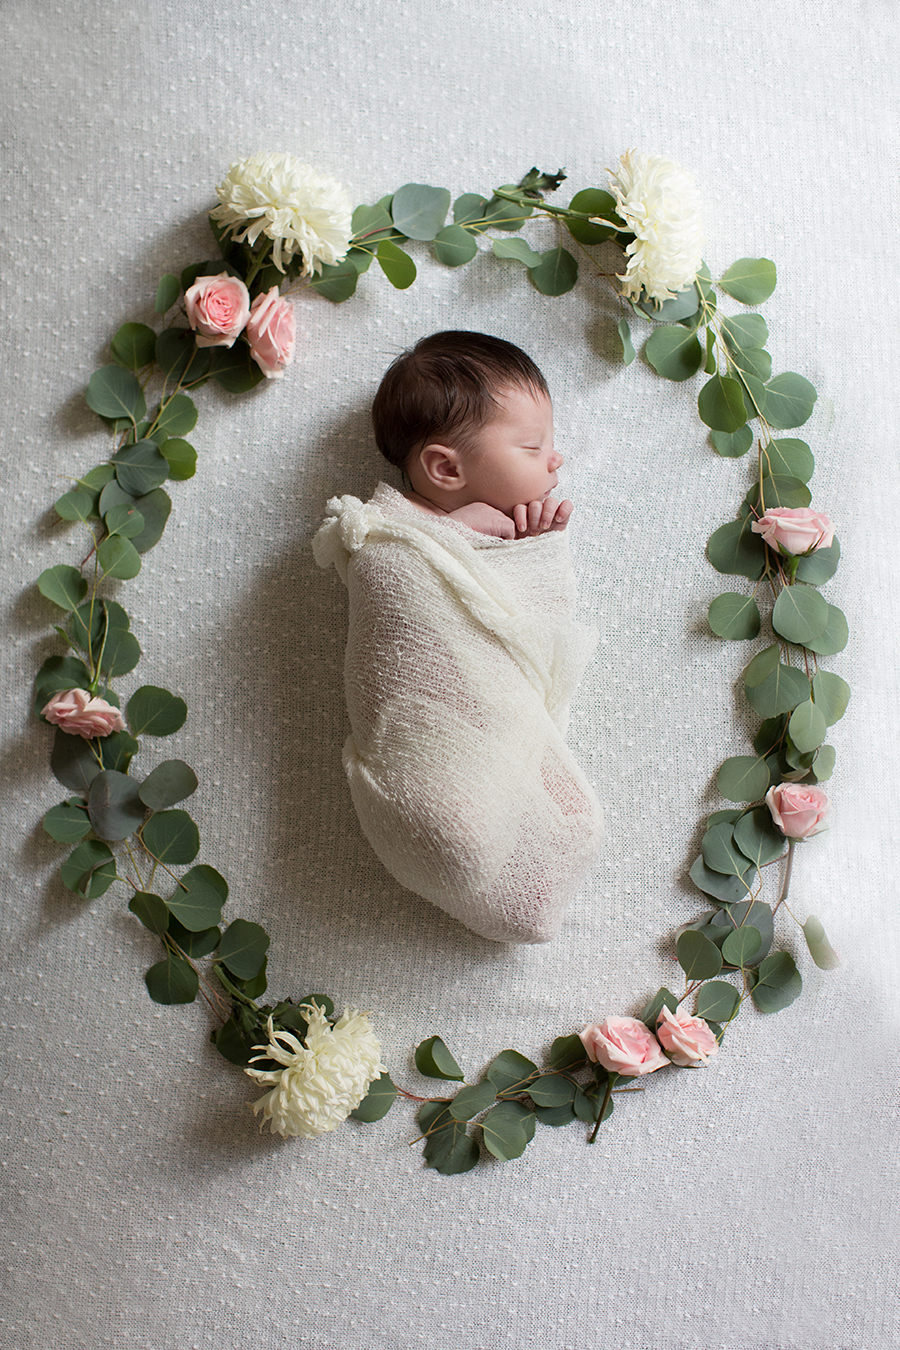 Flower halo at this Tullahoma, TN newborn session by Knoxville Wedding Photographer, Amanda May Photos.